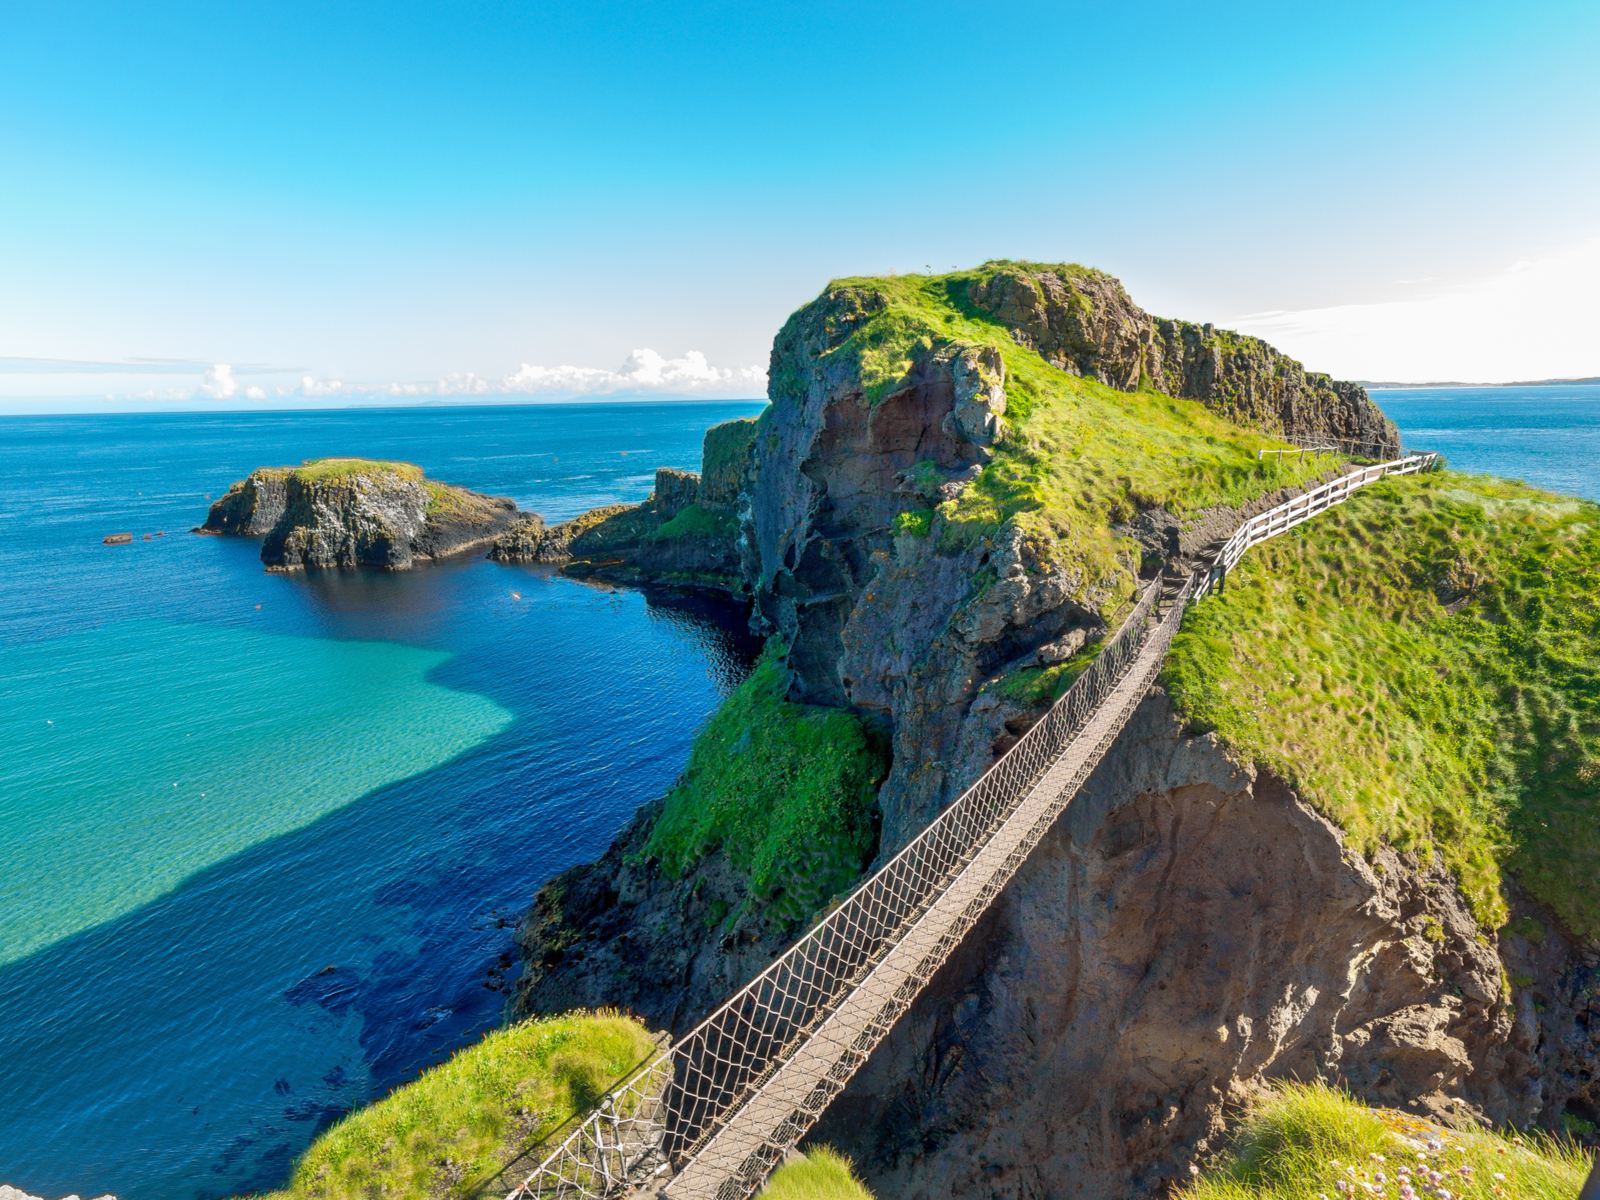 Rope bridge spanning the Carrick a Rede during the best time to visit Ireland